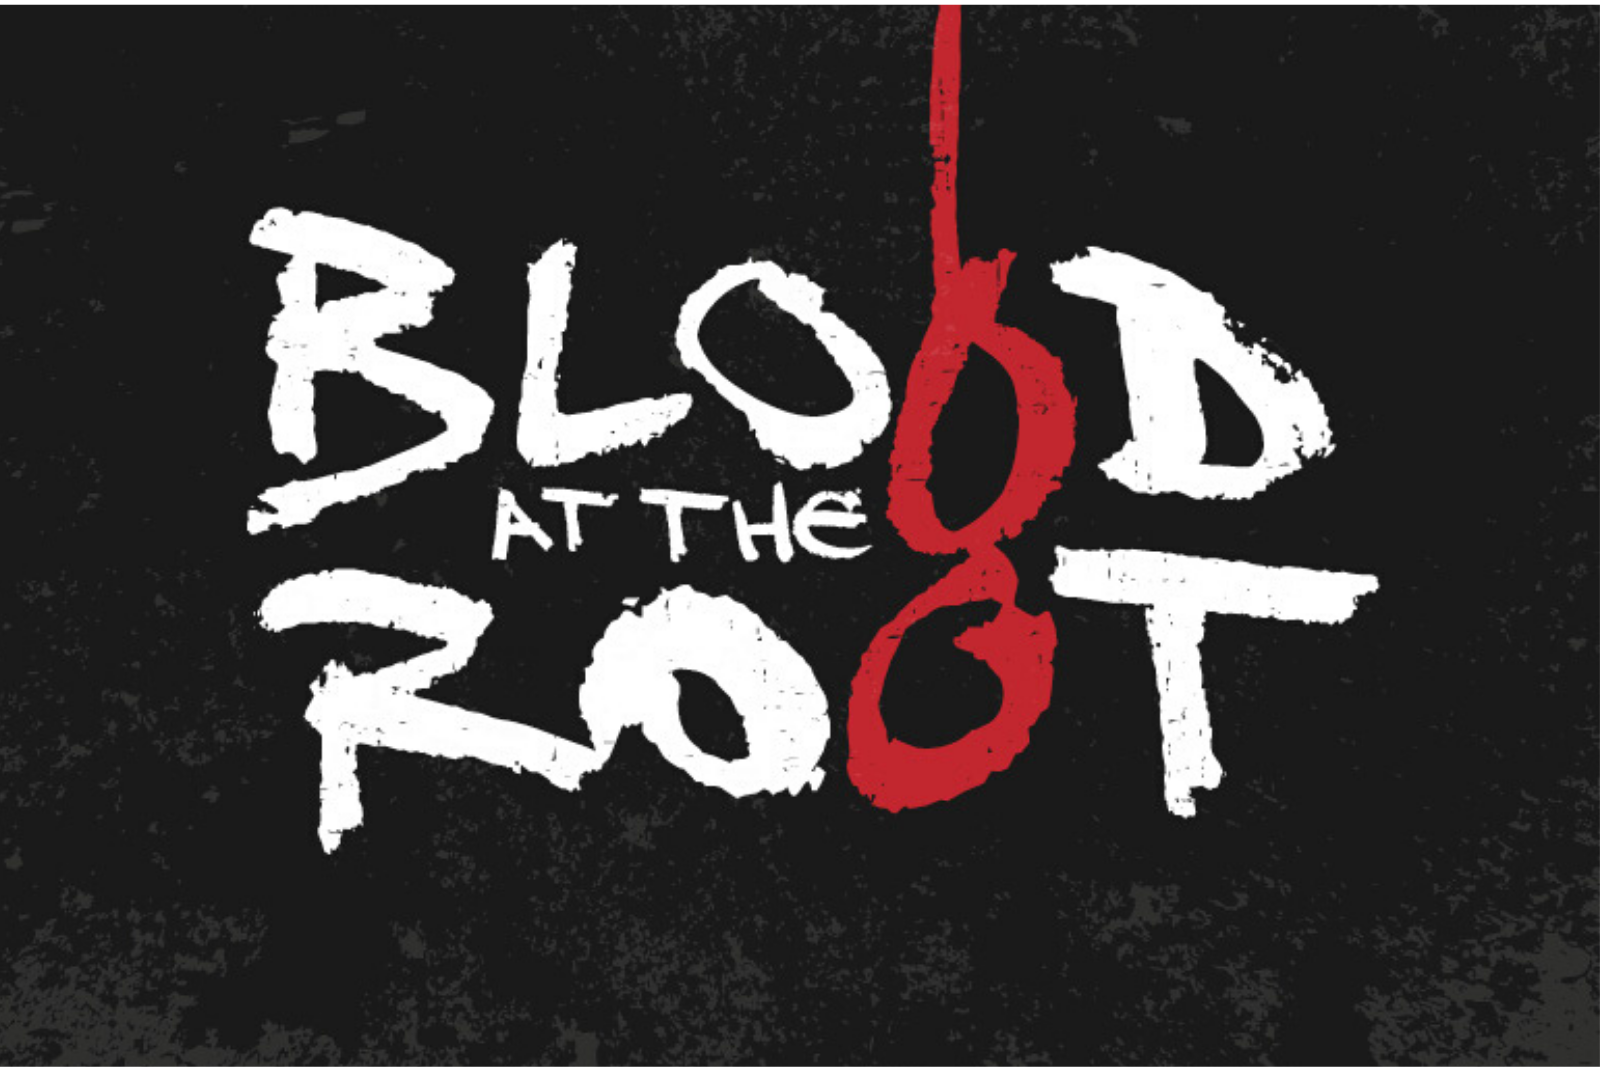 Blood at the root